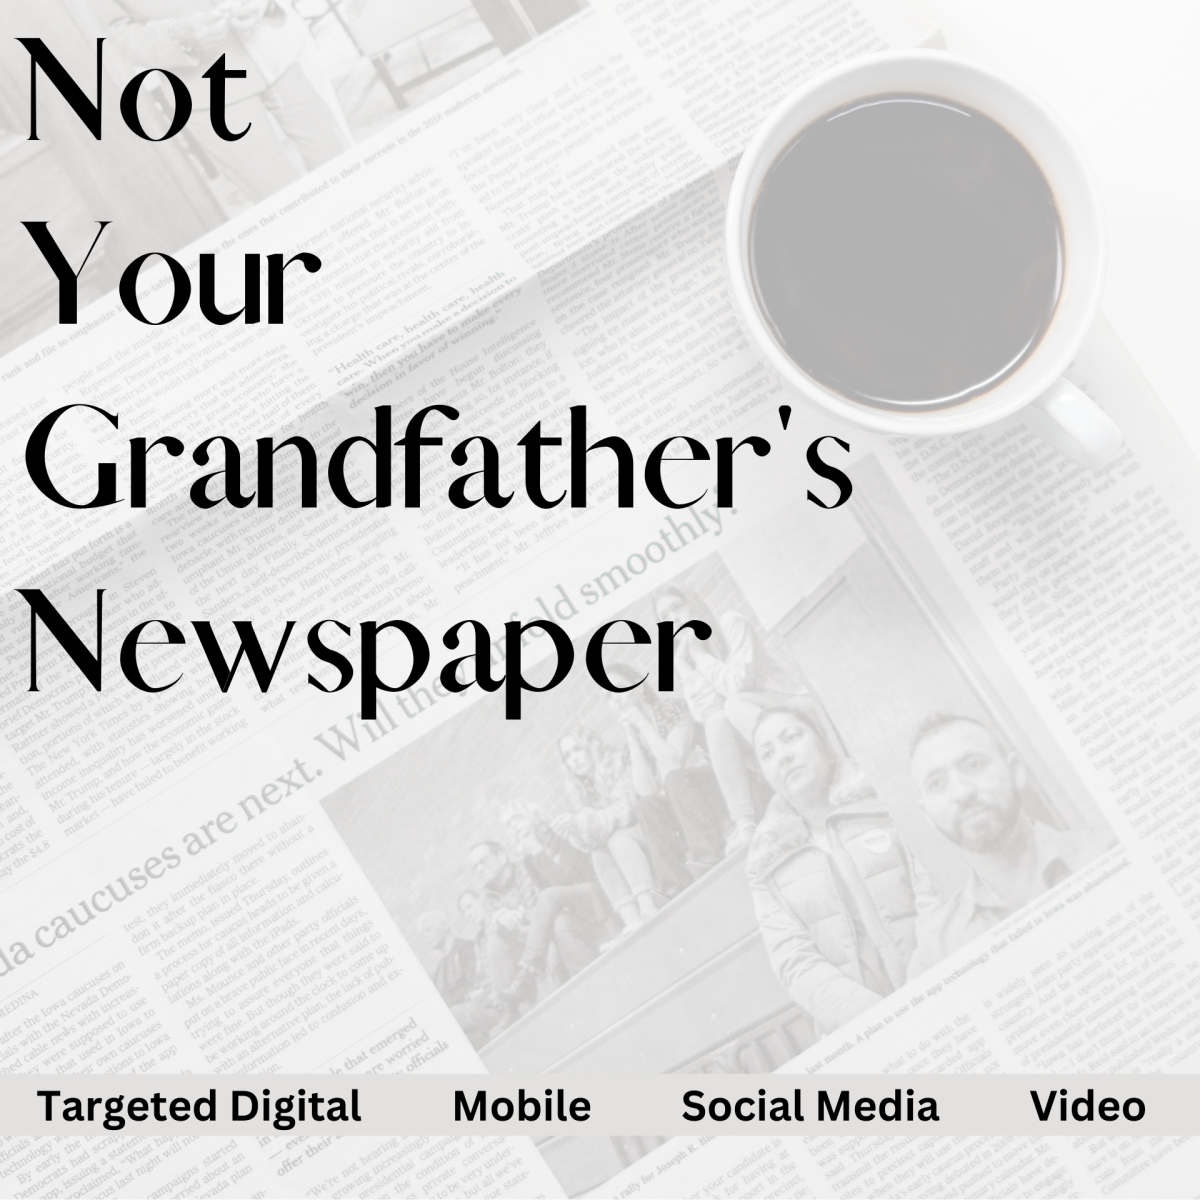 Not Your Grandfathers Newspaper